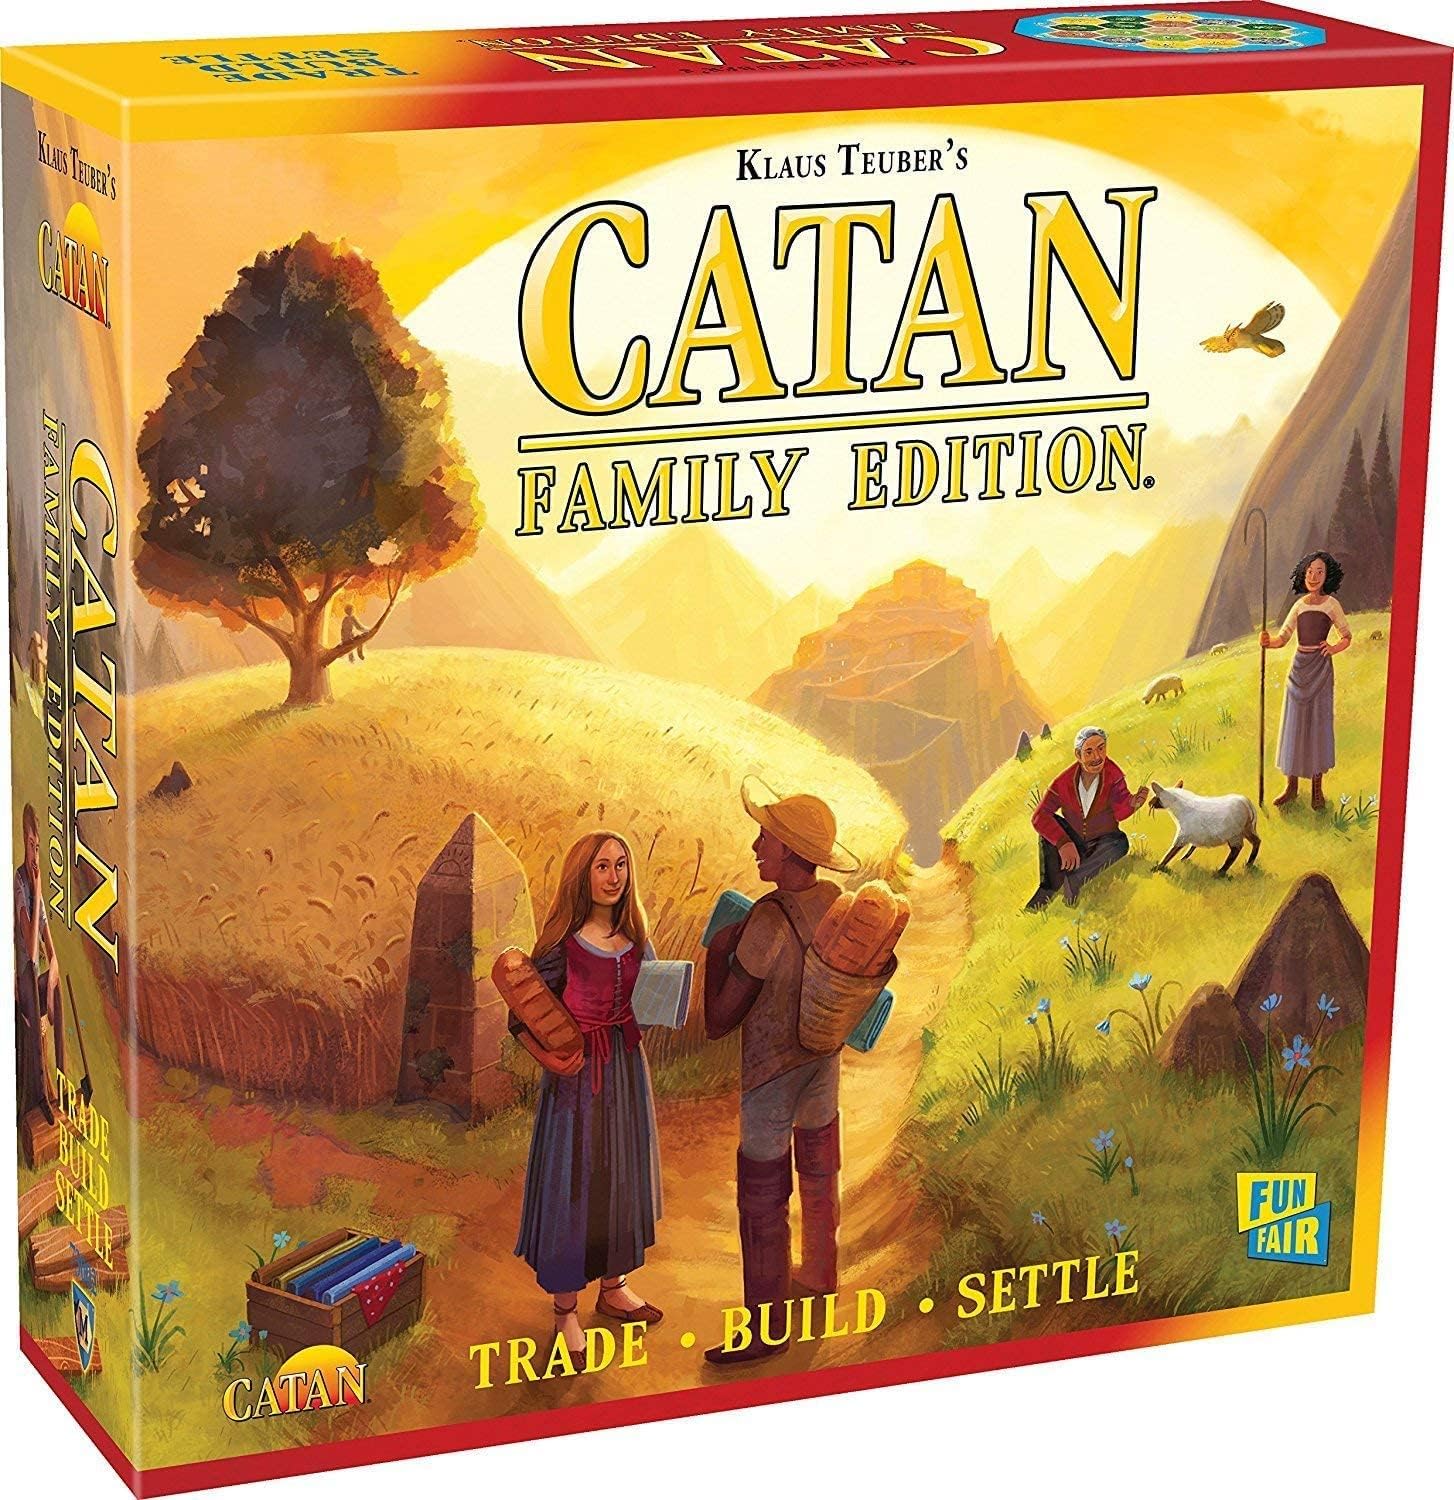 Catan Family Edition CatanCatan Family Edition features a six piece reversible board allowing for more replay value than the previous Gallery Edition. Sold by Board Hoarders